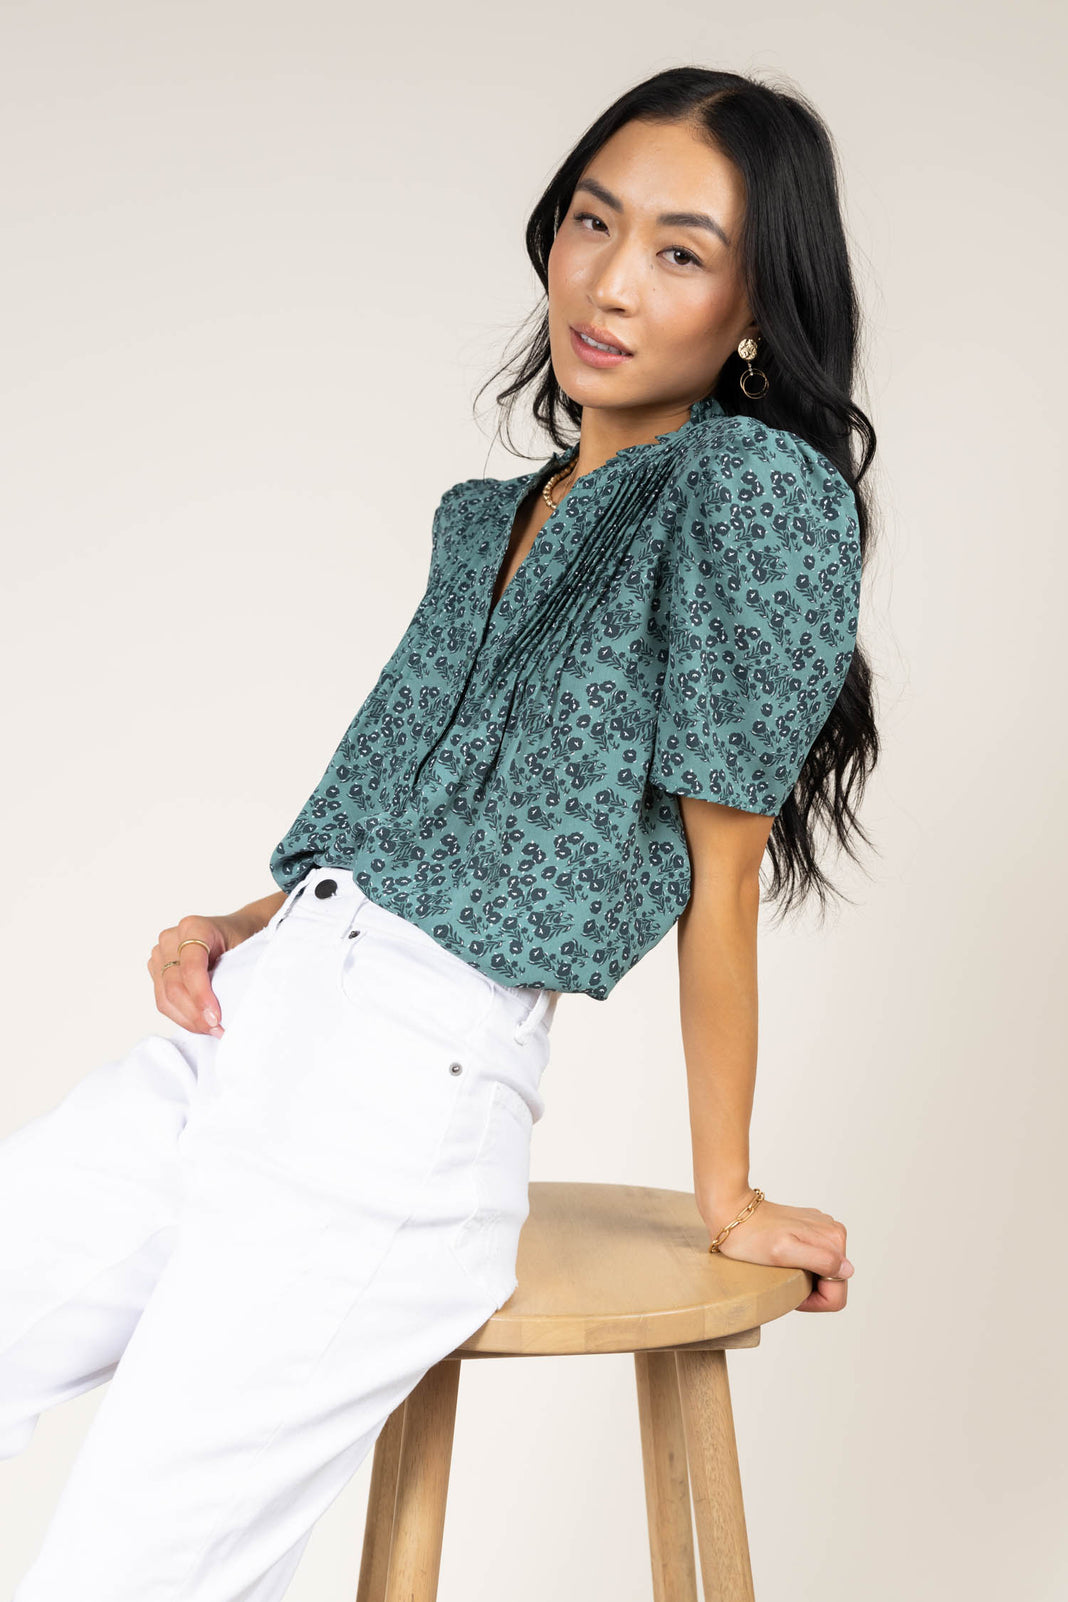 Model wearing teal floral blouse paired with white jeans